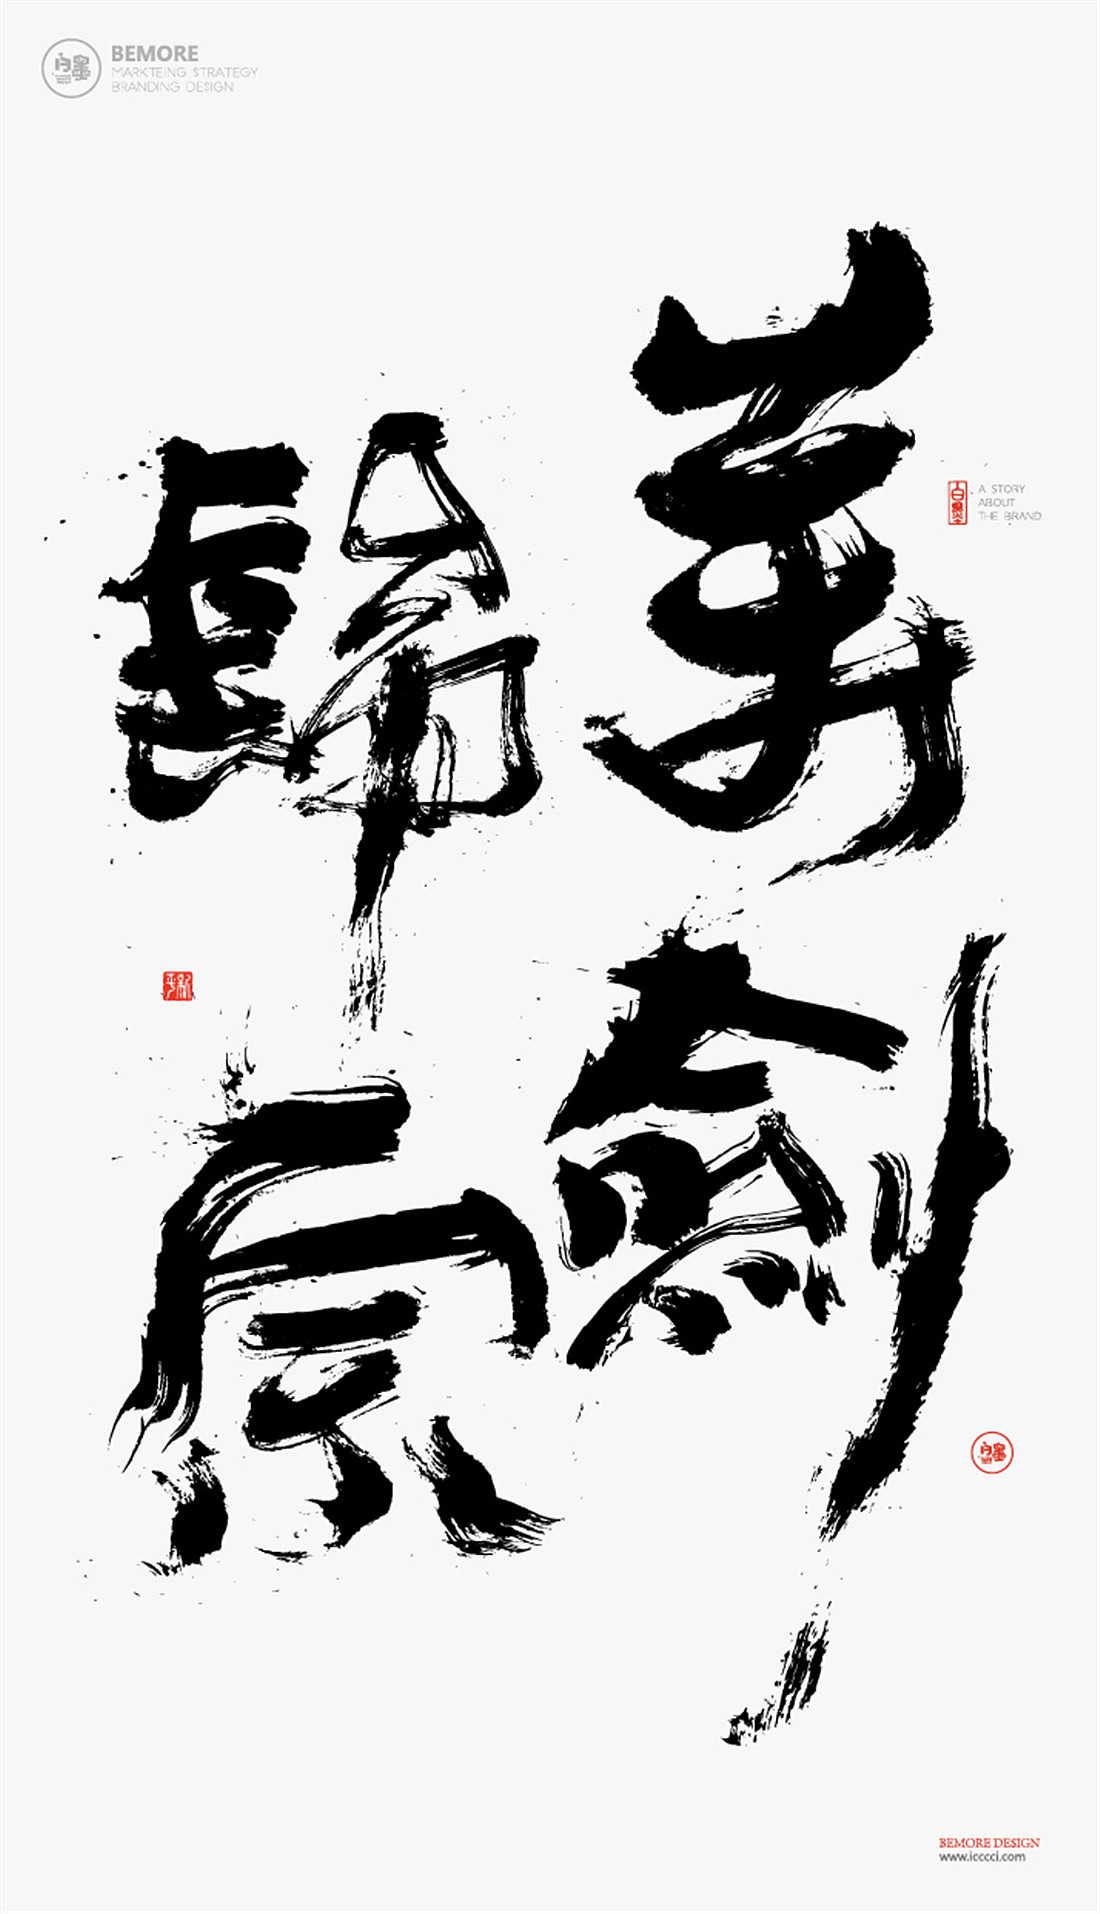 11P Calligraphy Font Design - Huangling Yehe - Greater China Festival Mid-Autumn Festival